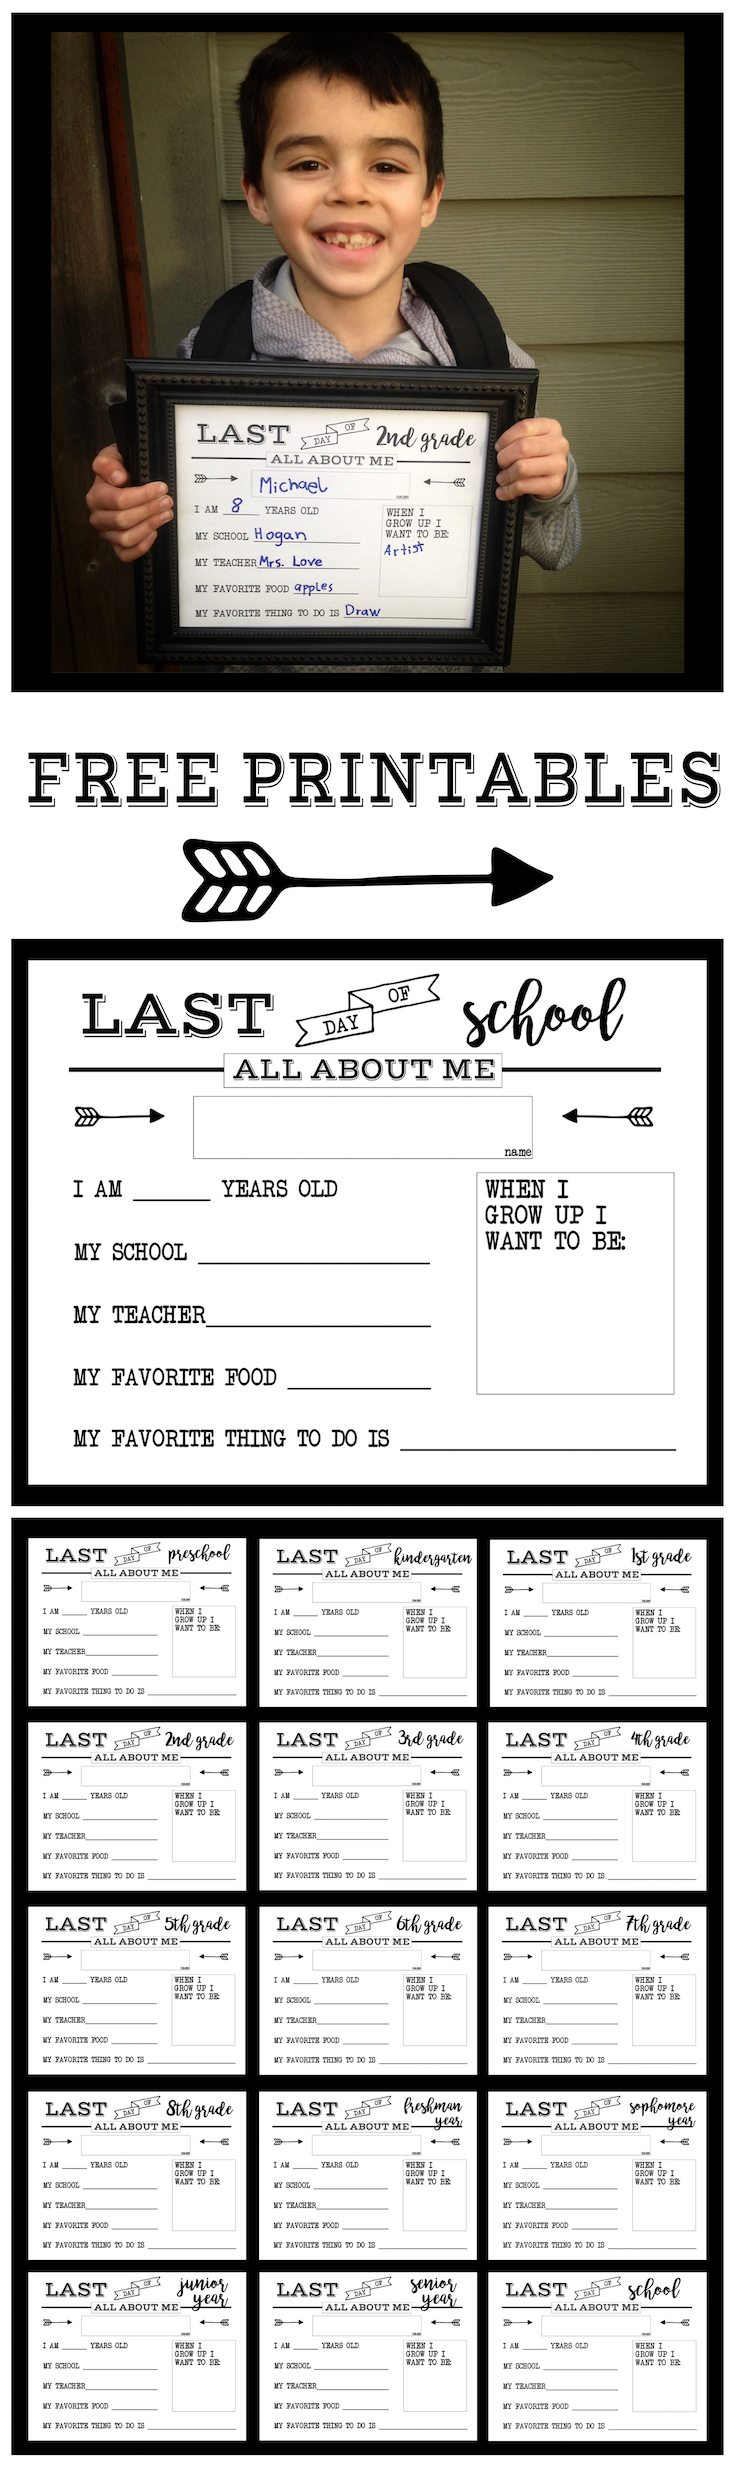 Last Day of School Free Printable All About Me Sign. End of year printable sign for preschool, kindergarten, first grade through senior year.